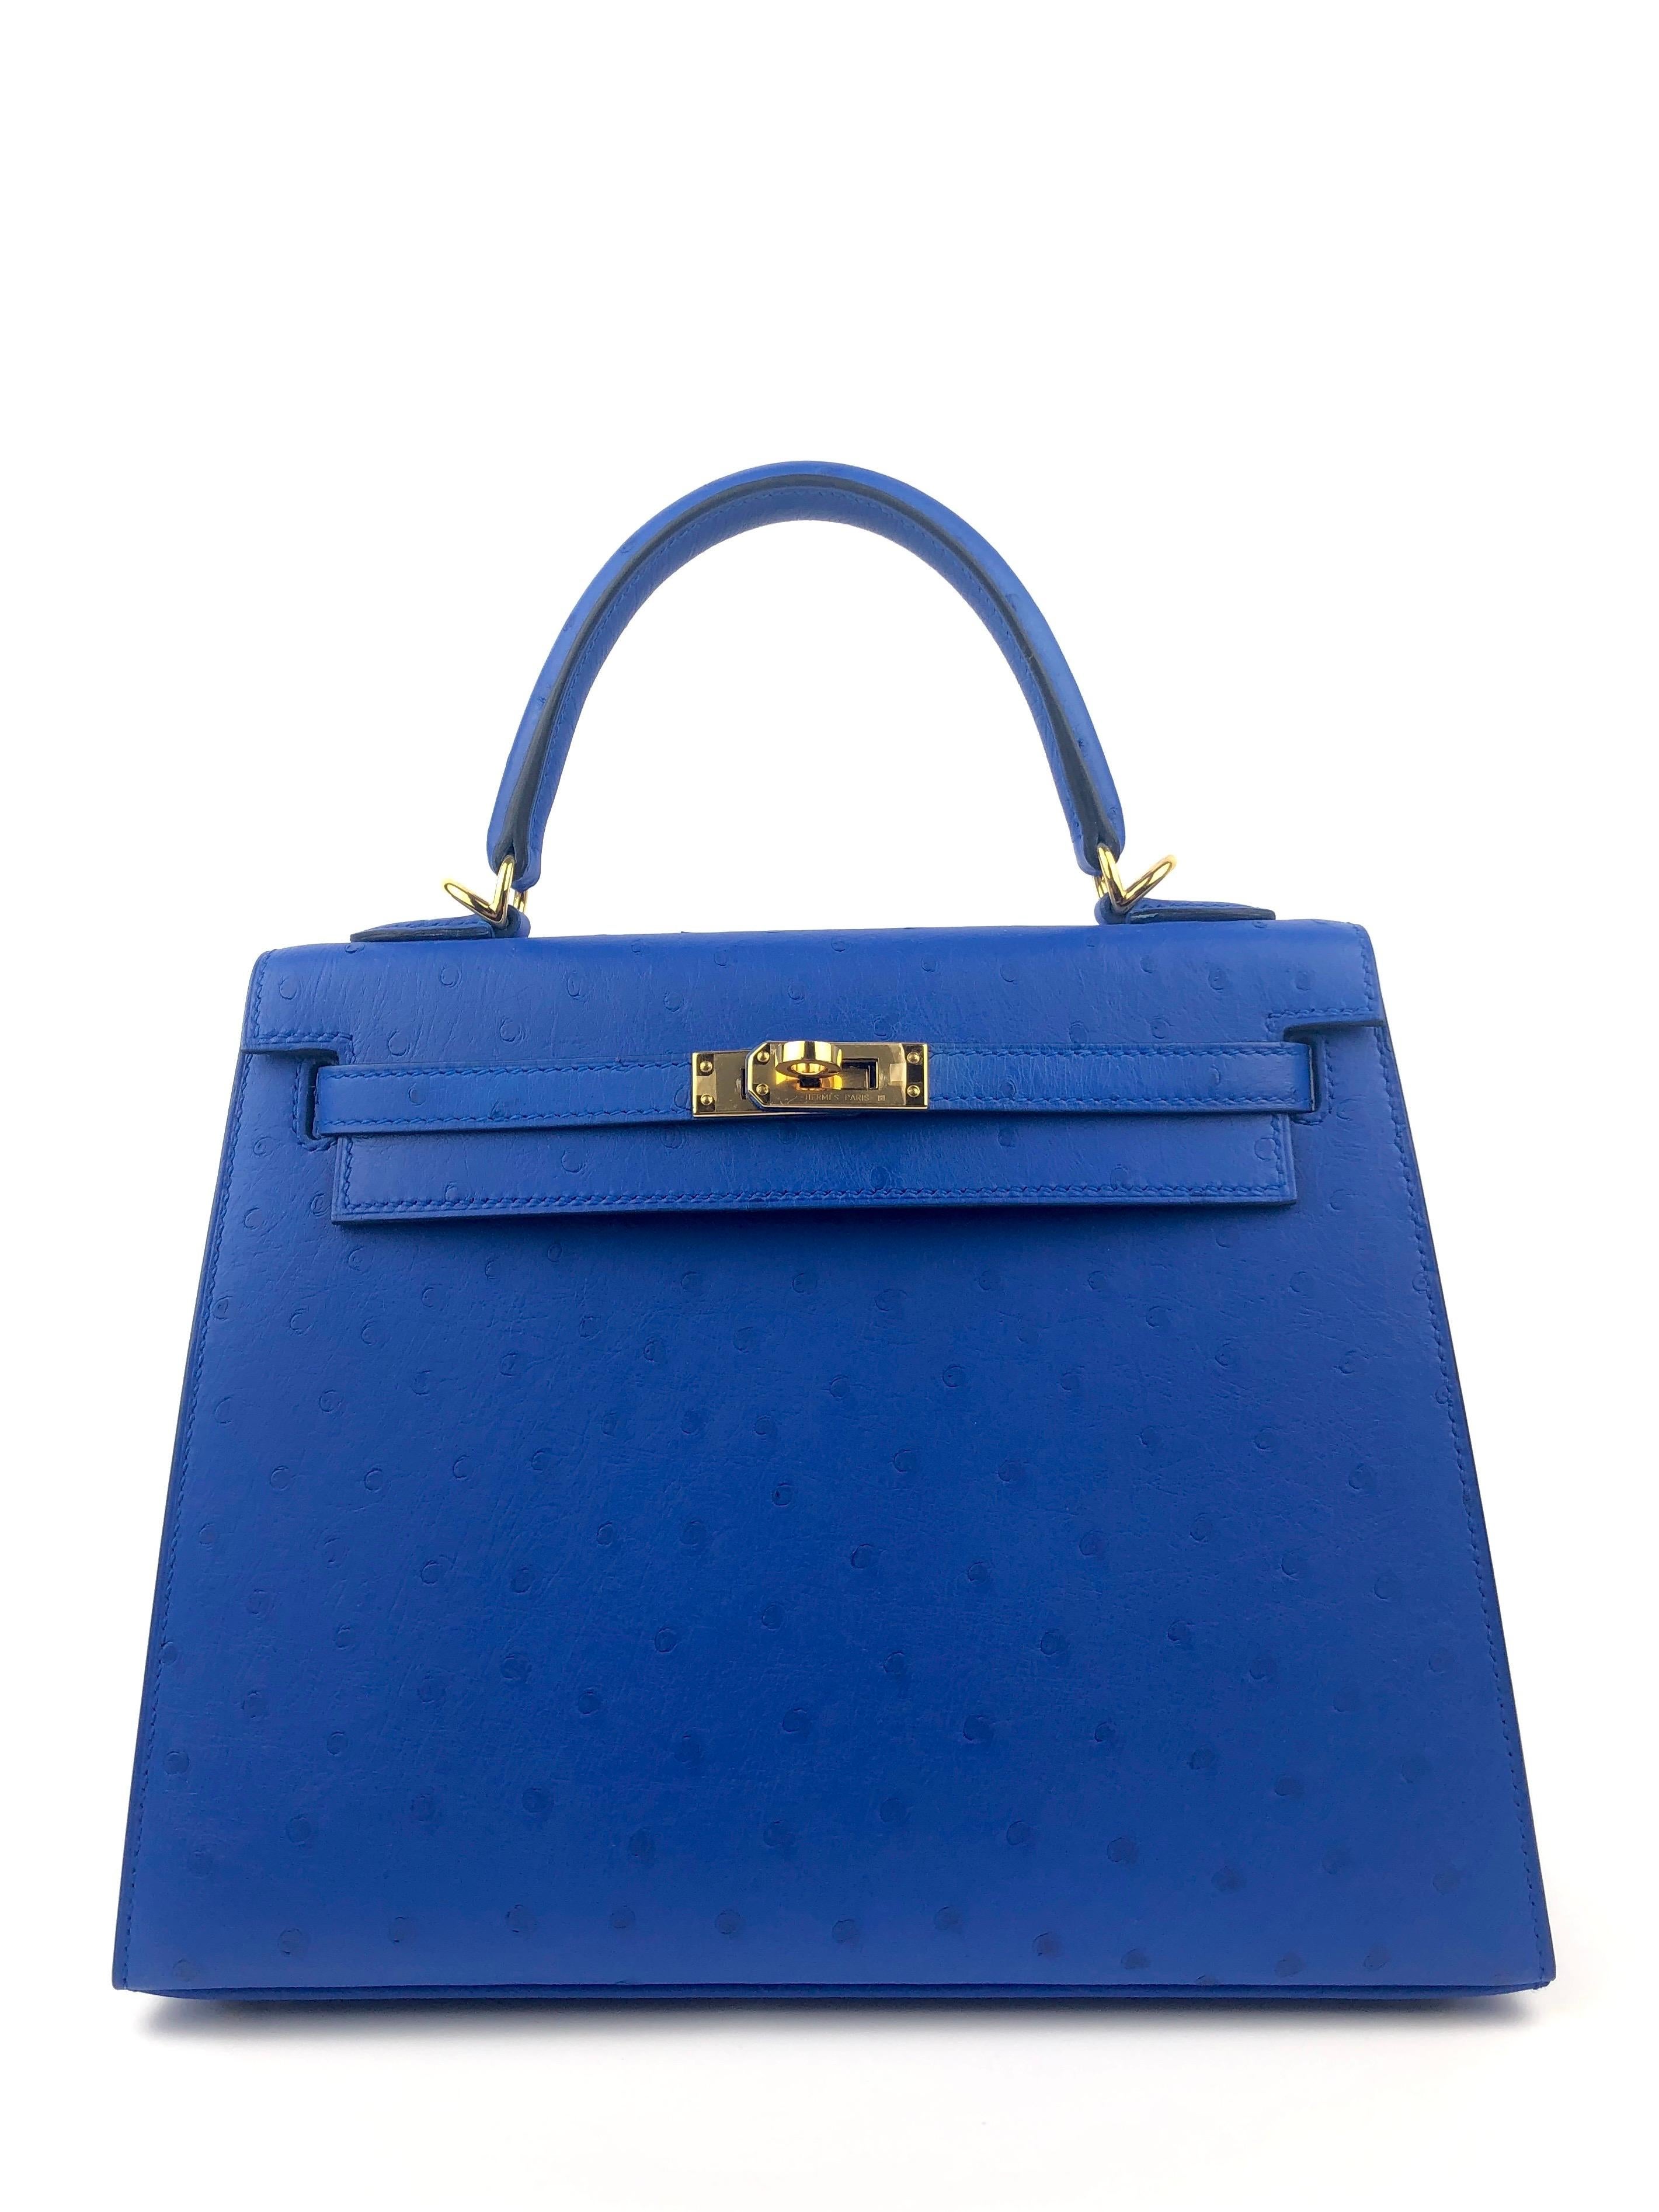 New Hermes Kelly 25 Ostrich Bleuet Blue Gold Hardware. New rare Bleuet Hermes color. From collectors closet! D Stamp 2019. 

Shop with Confidence from Lux Addicts. Authenticity Guaranteed!